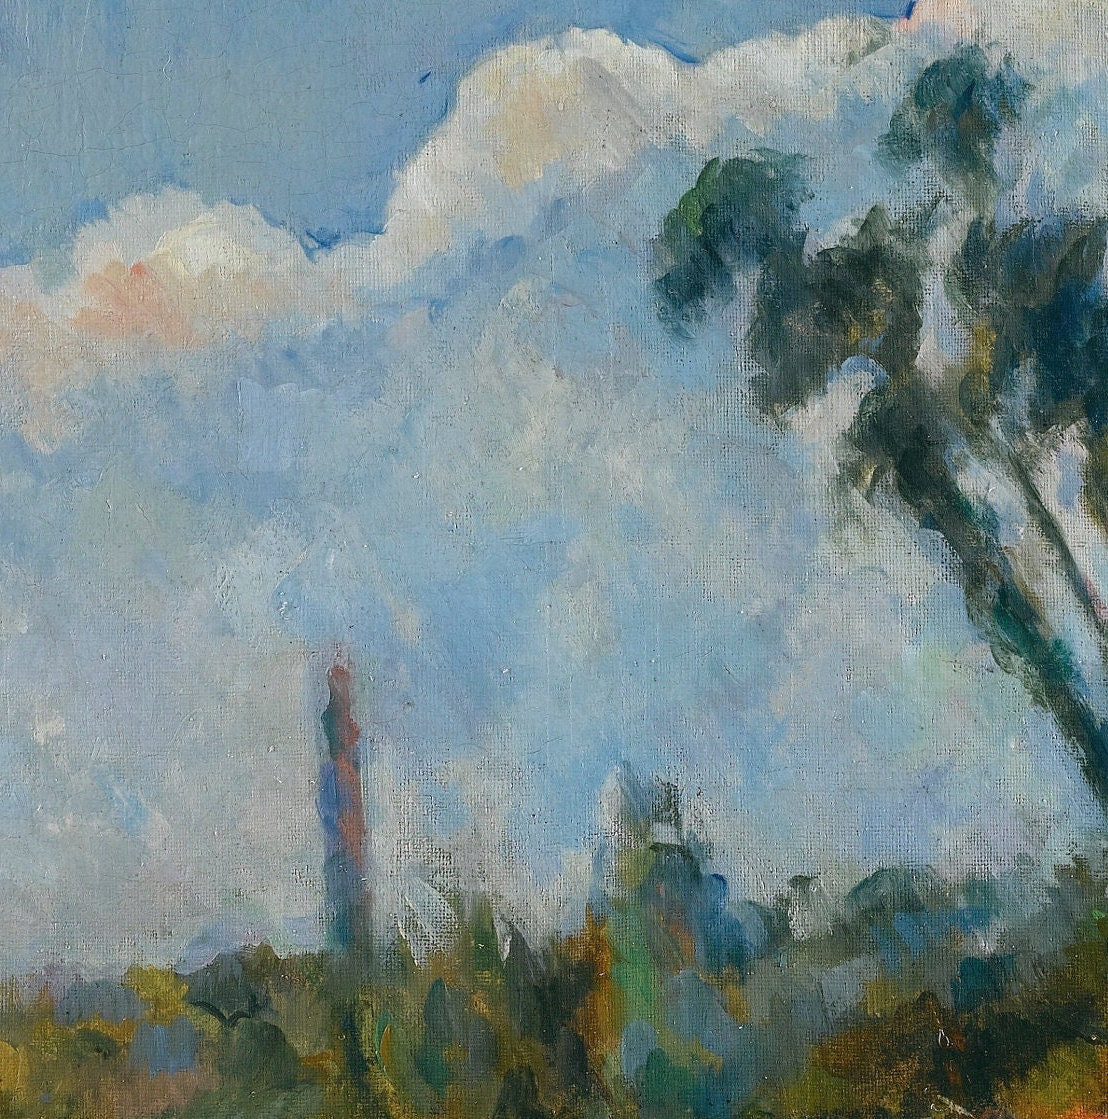 La Rivière - by Paul Cezanne,3d Printed with texture and brush strokes looks like original oil-painting,code:721